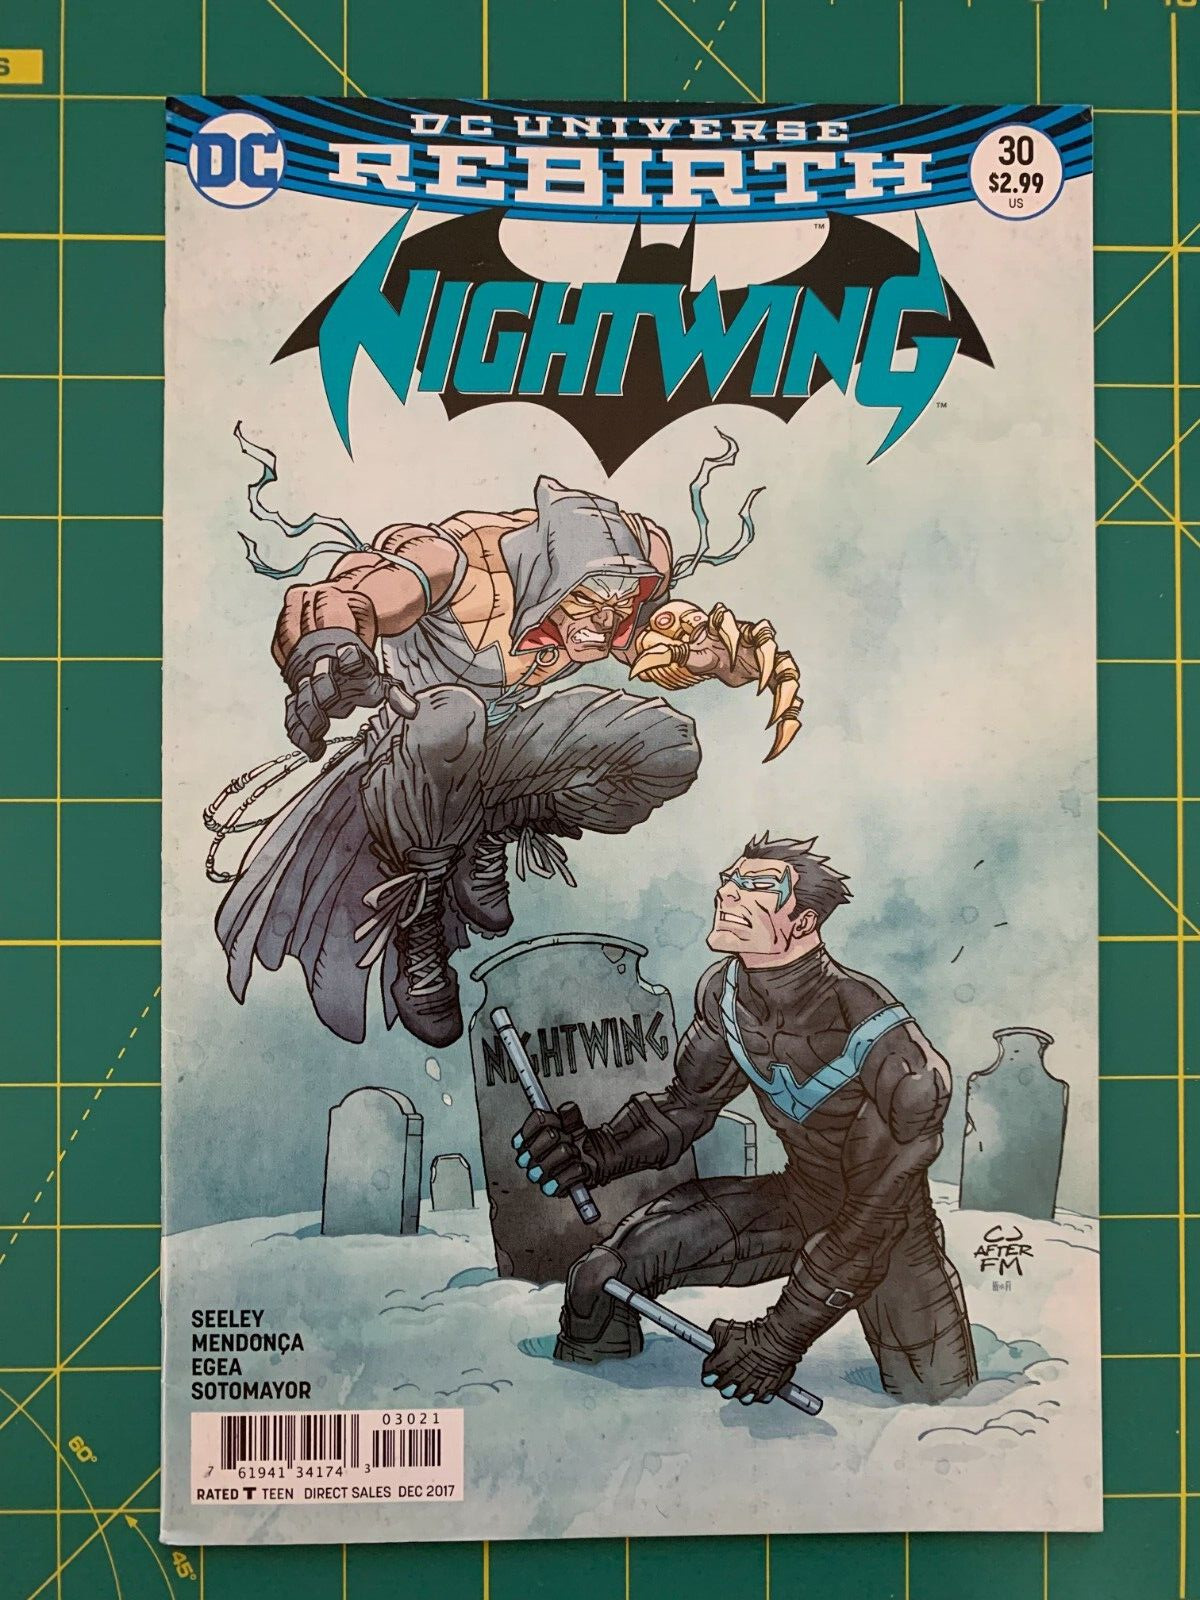 Nightwing #30 - Oct 2017 - Vol.4 - #30B Variant Cover       (6215)